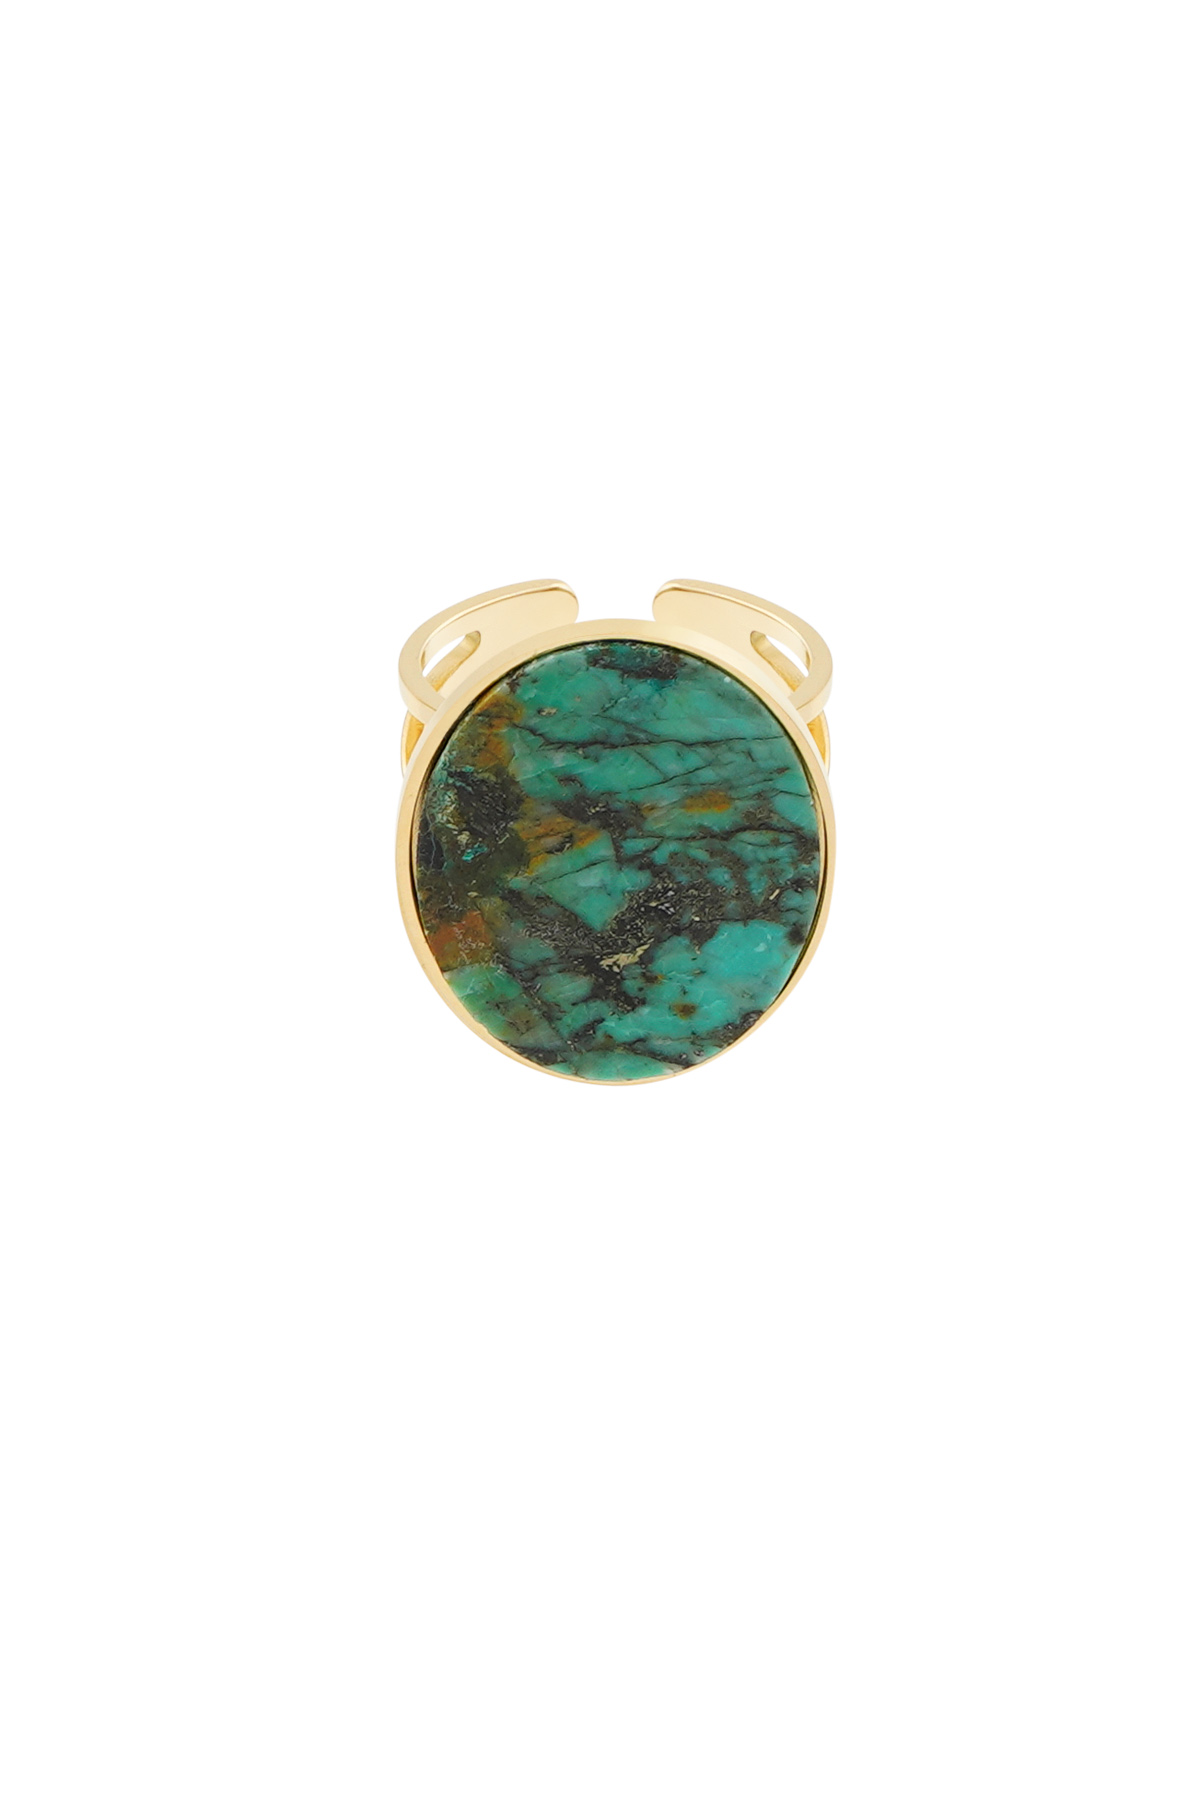 Ring large stone - gold/turquoise h5 